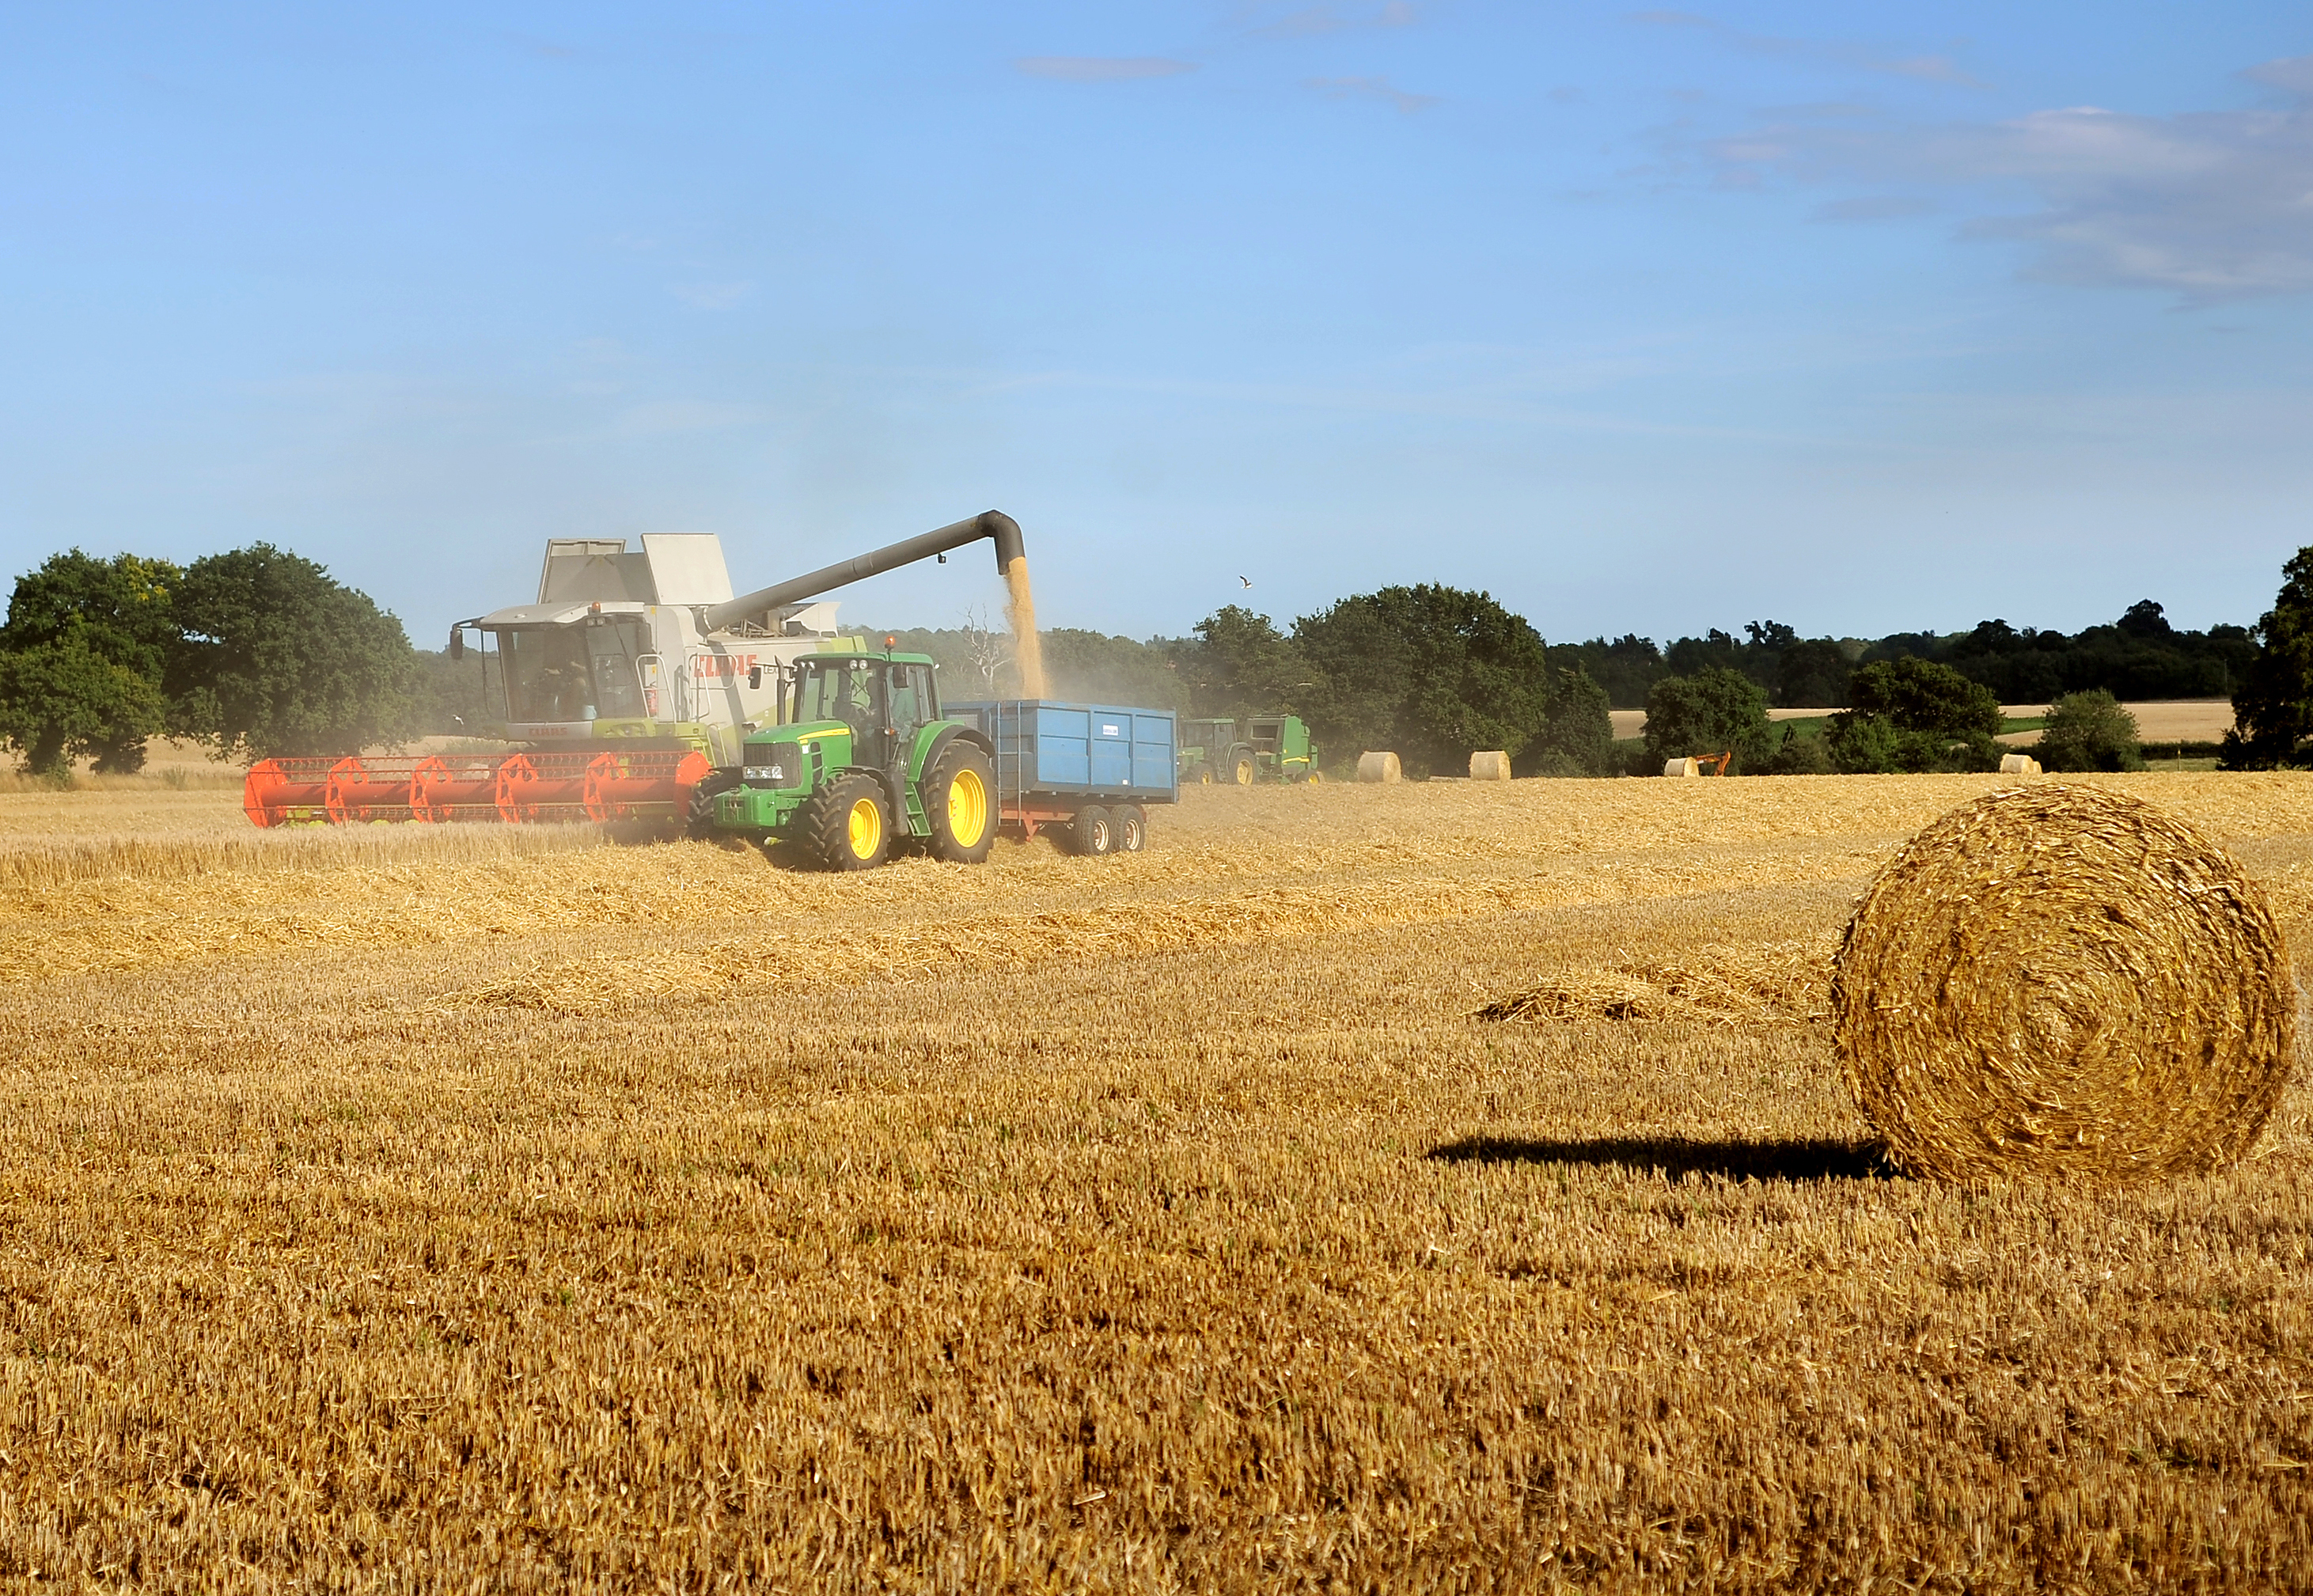 Harvesters at work (Anthony Devlin/PA)